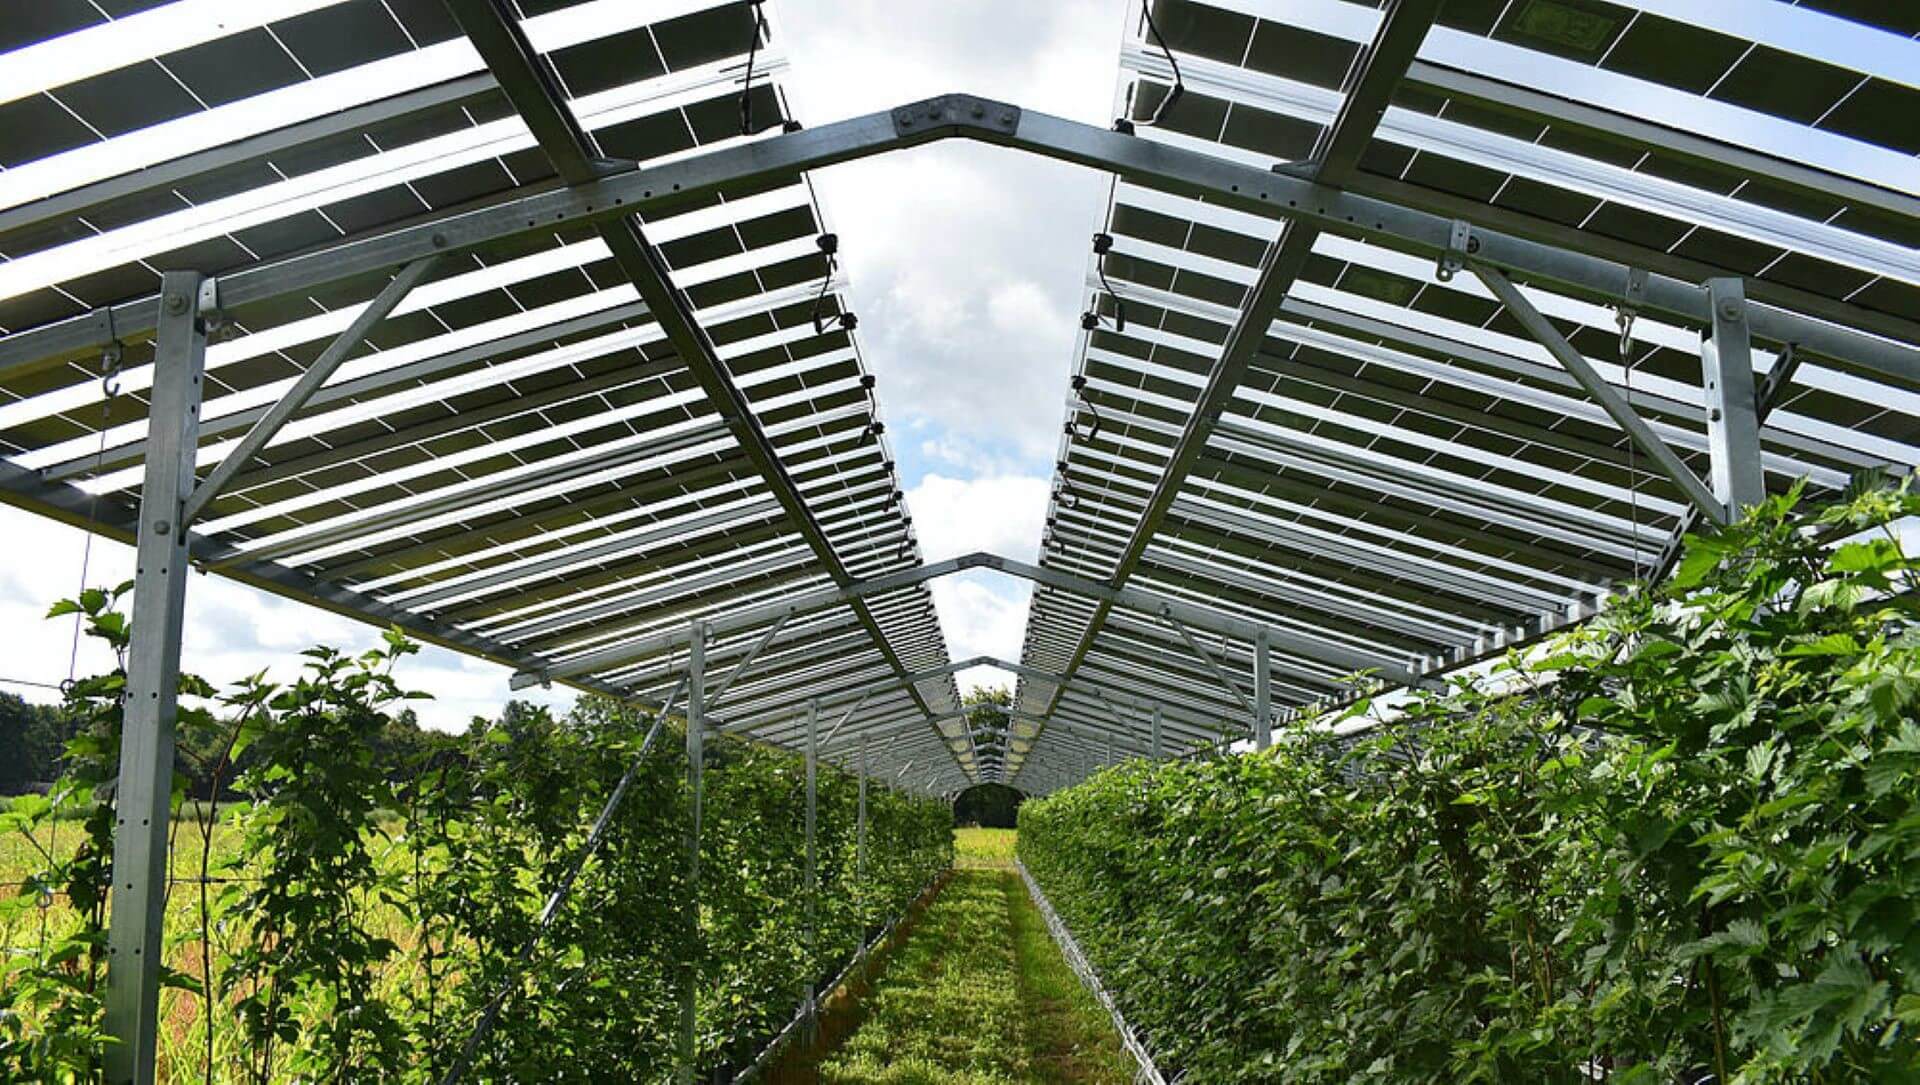 Rows of crops under solar panels